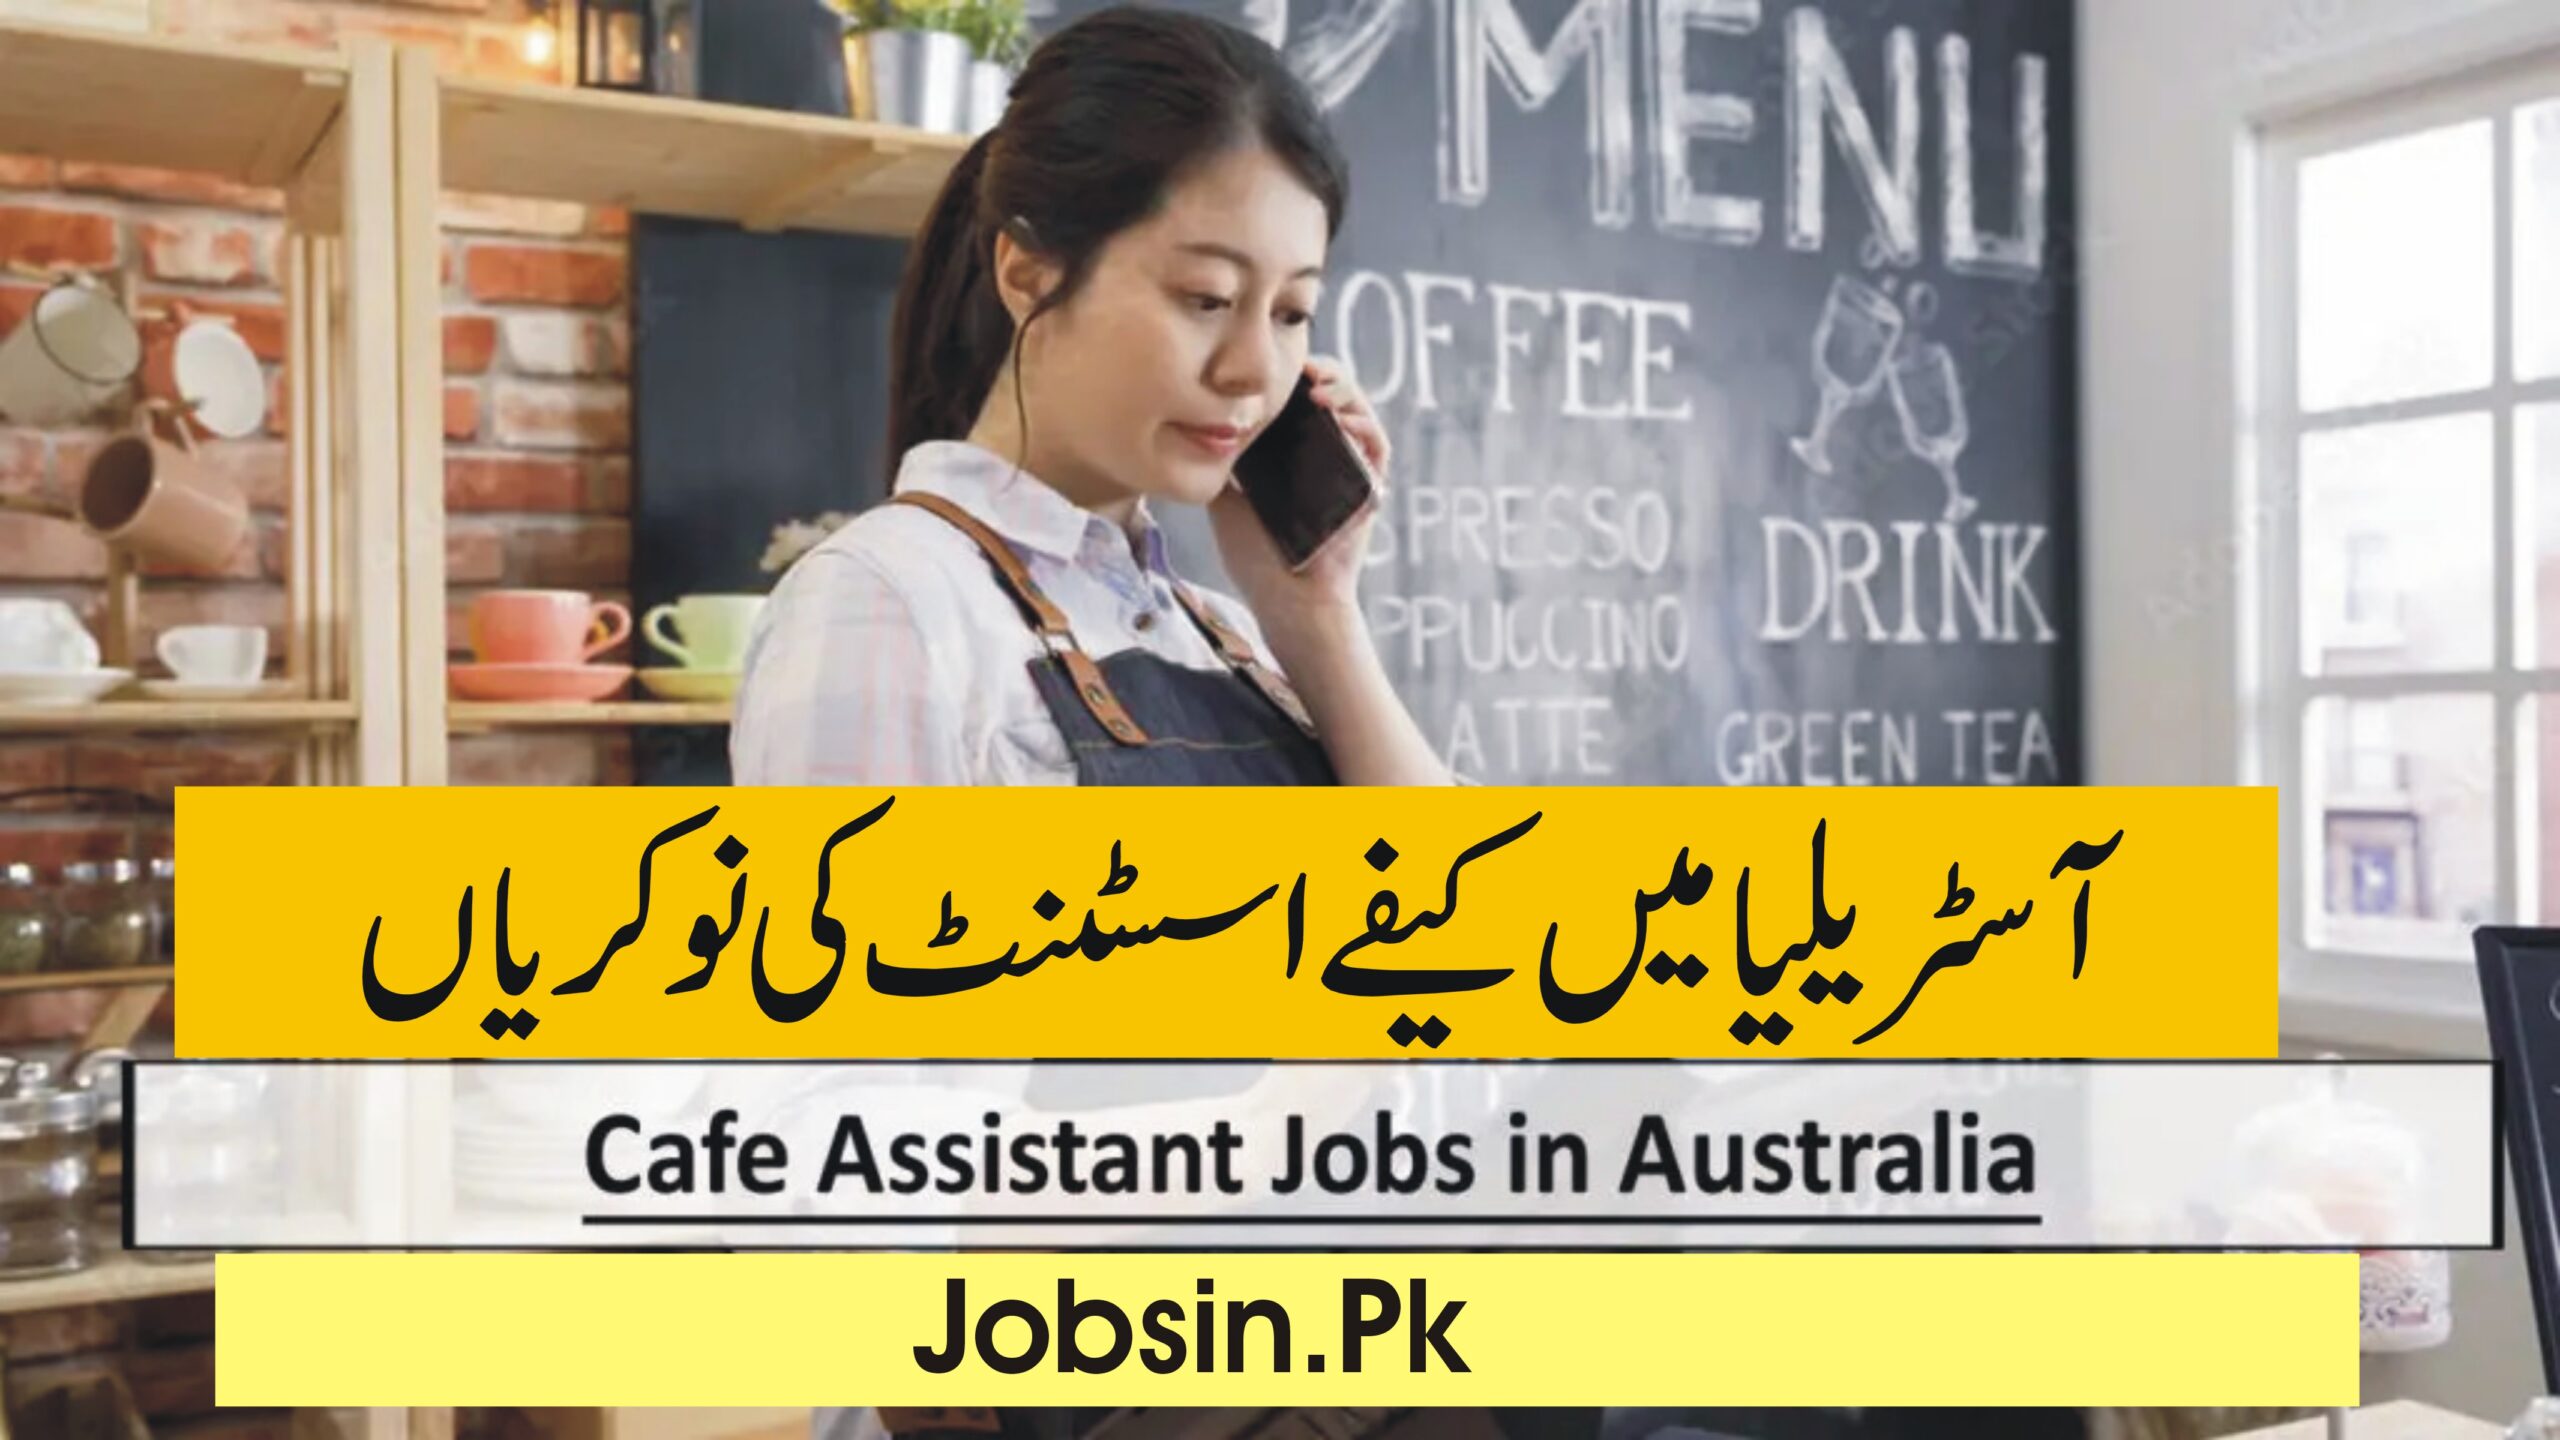 Cafe Assistant Jobs in Australia